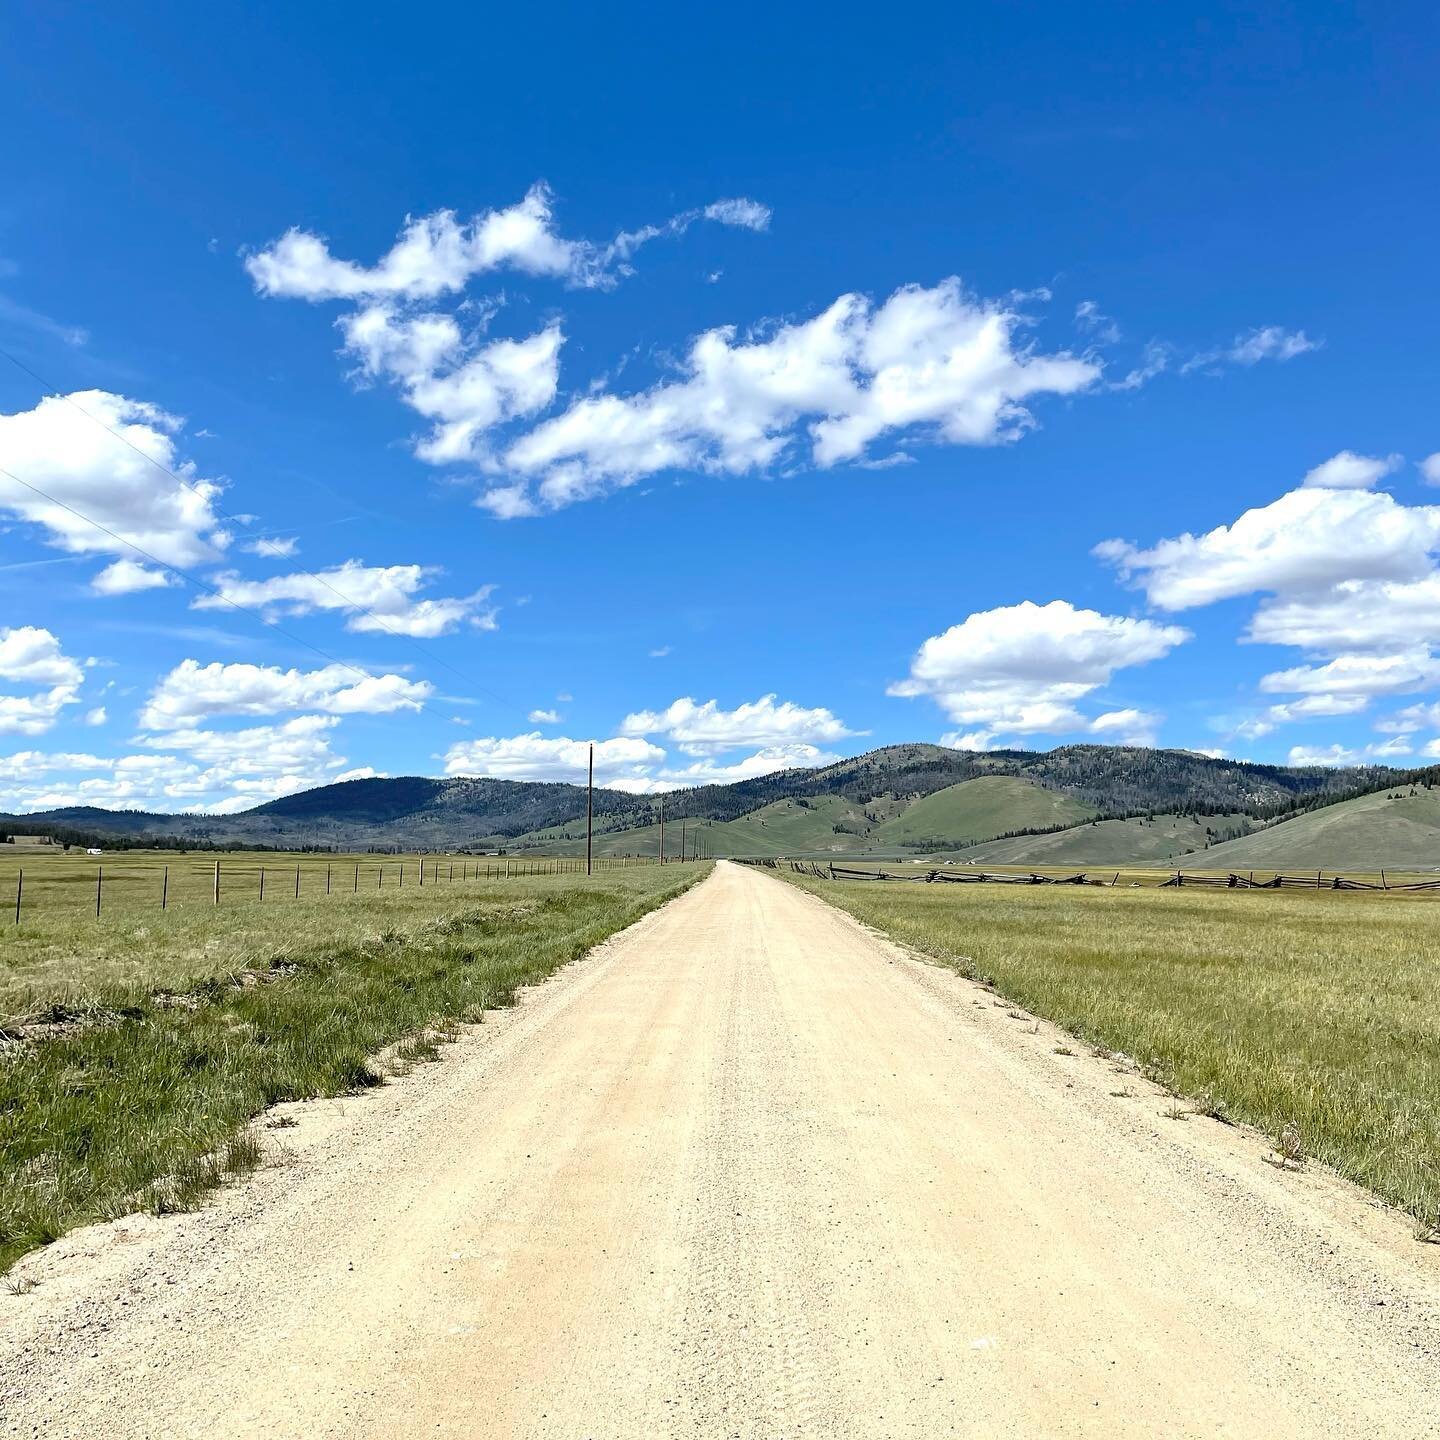 Open roads and blue skies. Stanley is something special! #sawtoothvista